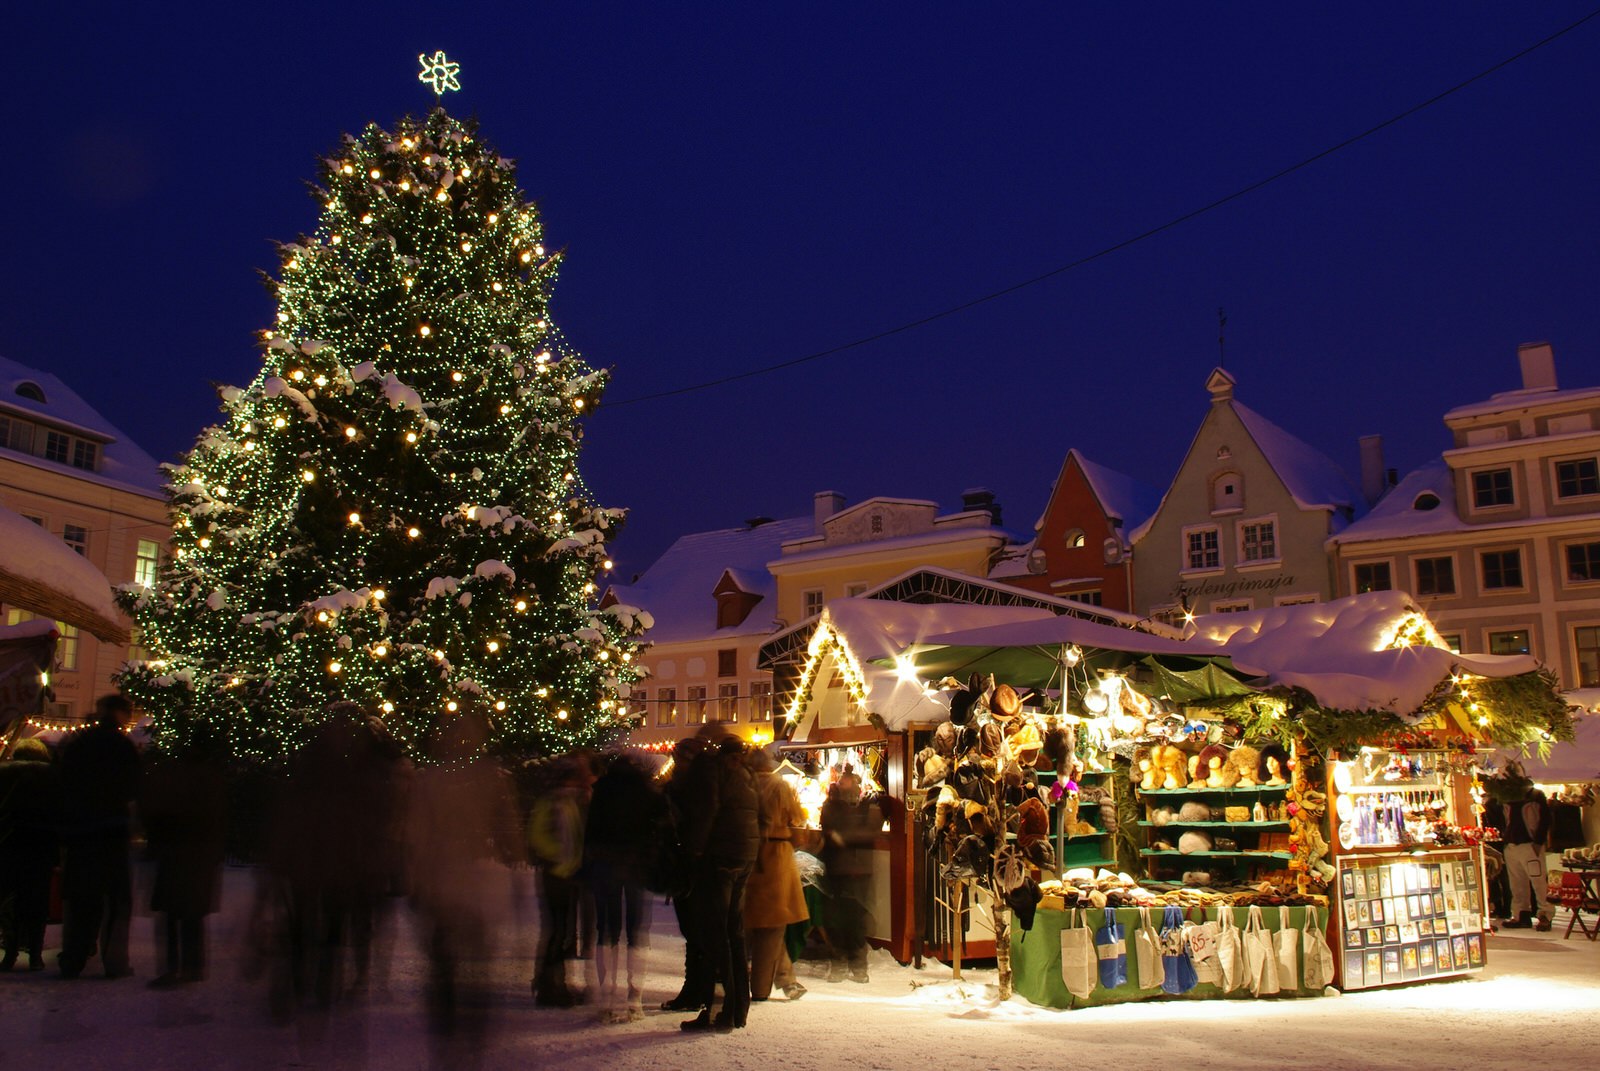 Christmas market in Tallinn, Estonia, at night. There is a huge decorated Christmas tree among the wooden stalls selling Christmas trinkets. There are blurred people walking through the market.